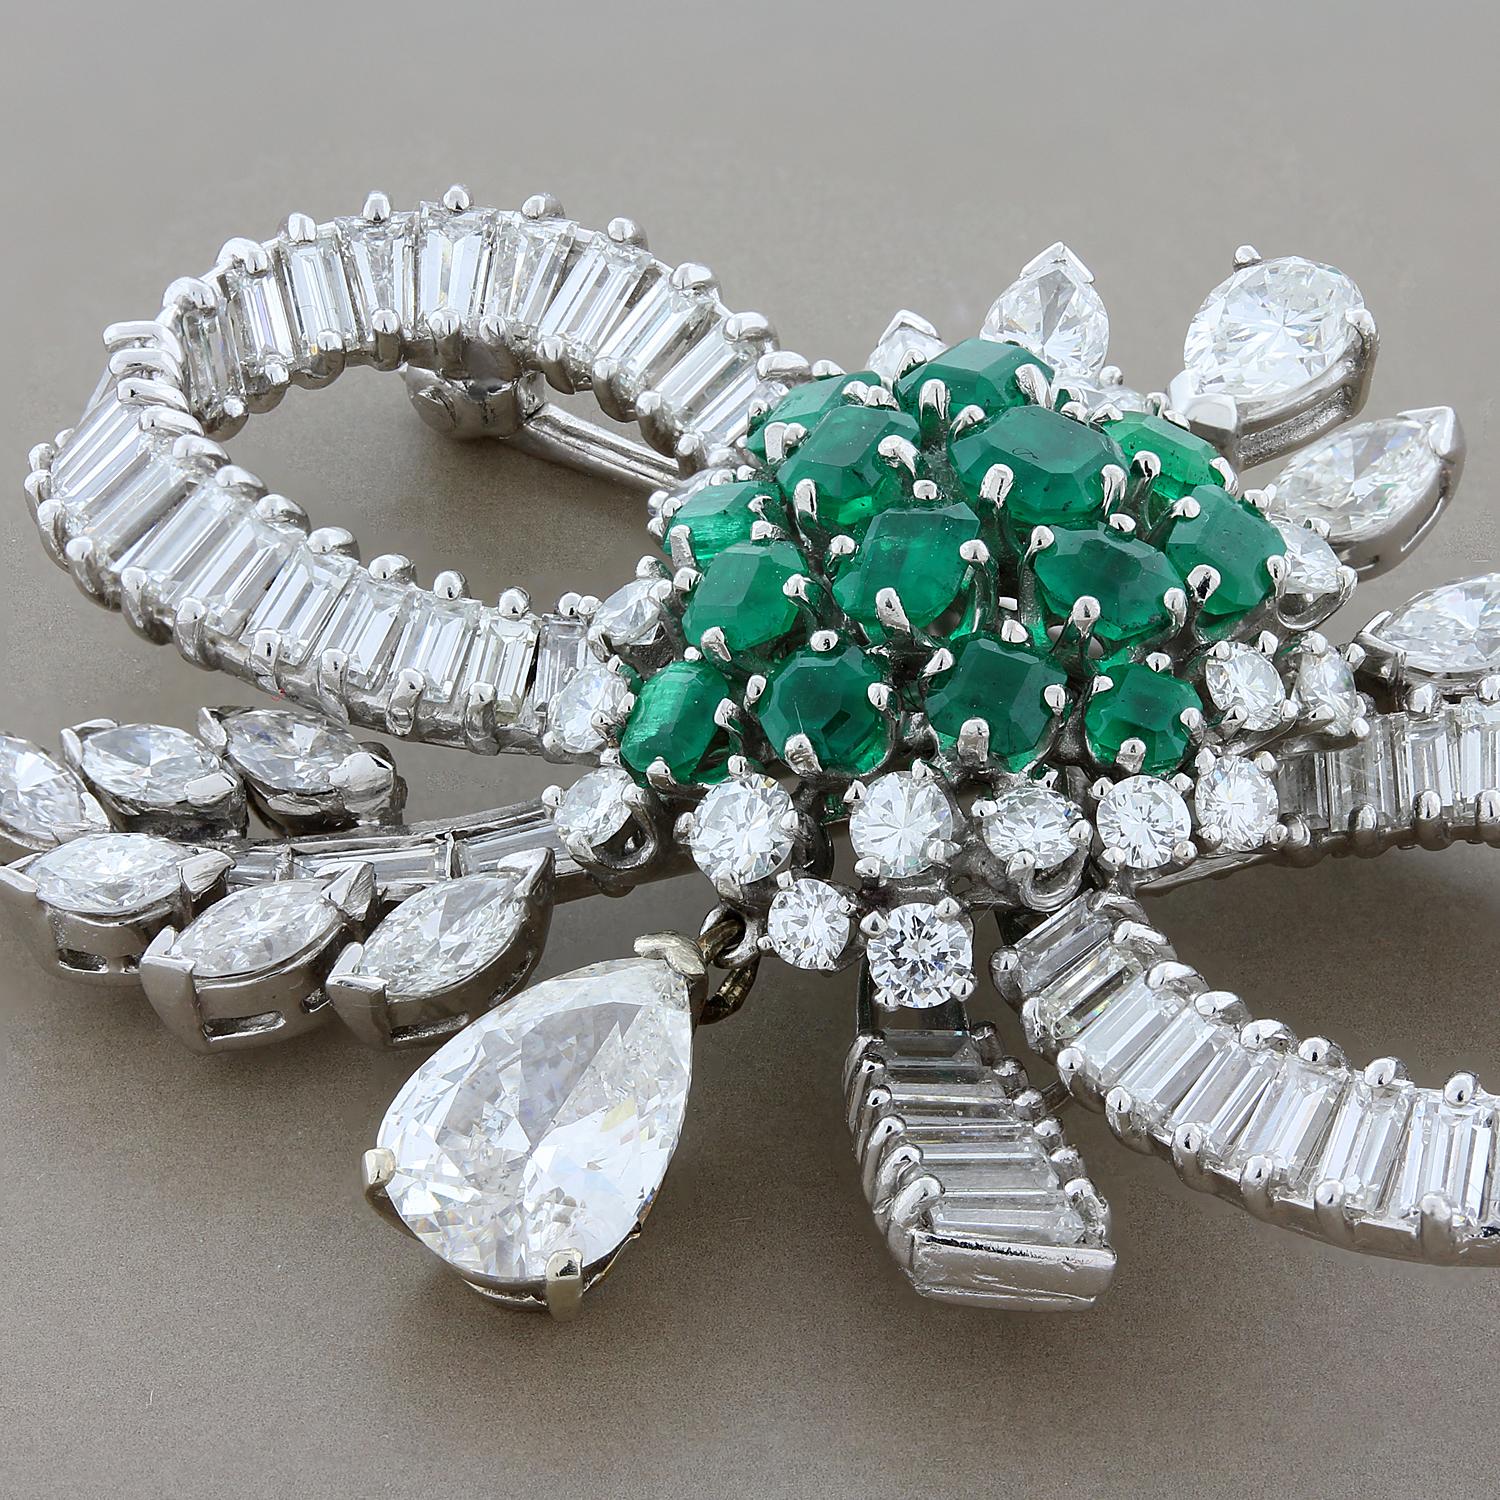 An expertly crafted brooch from the mid 1900’s featuring a total of 7 carats of diamonds including a 1.90 carat pear shape diamond drop. In the center of the brooch are 2 carats of fine deep green emeralds giving the piece great color. Set in